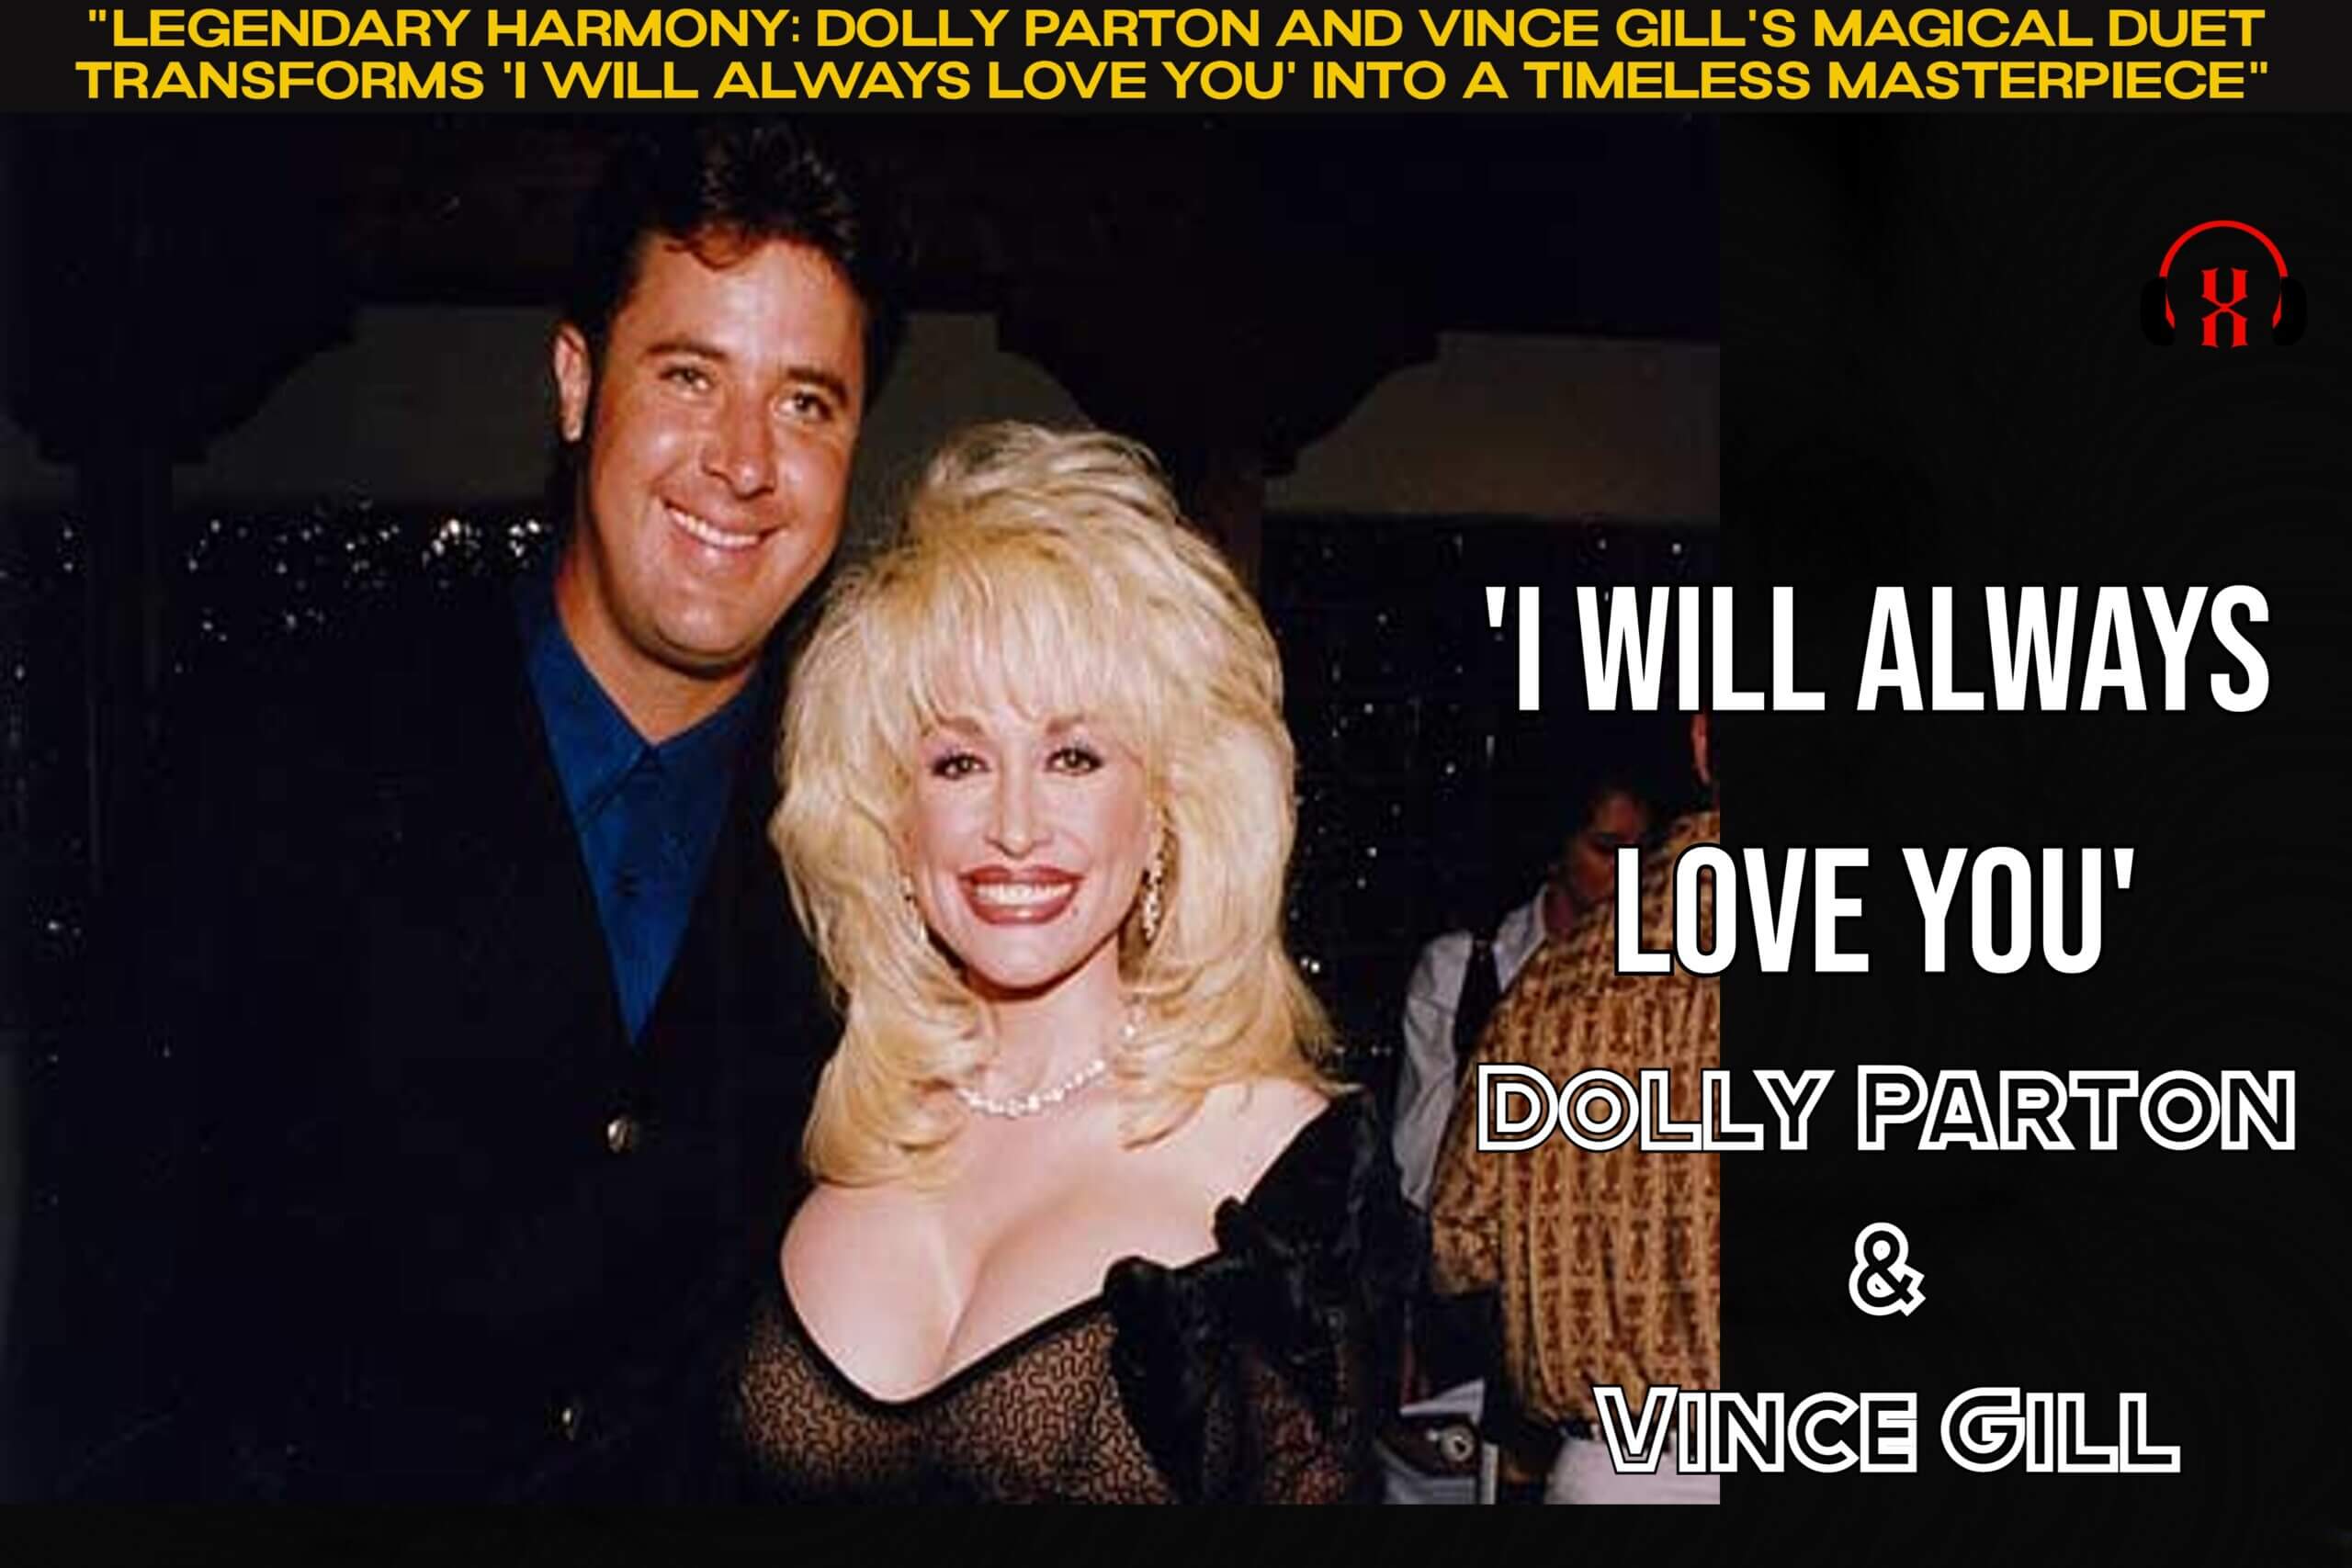 Legendary Harmony Dolly Parton and Vince Gill's Magical Duet Transforms 'I Will Always Love You' into a Timeless Masterpiece